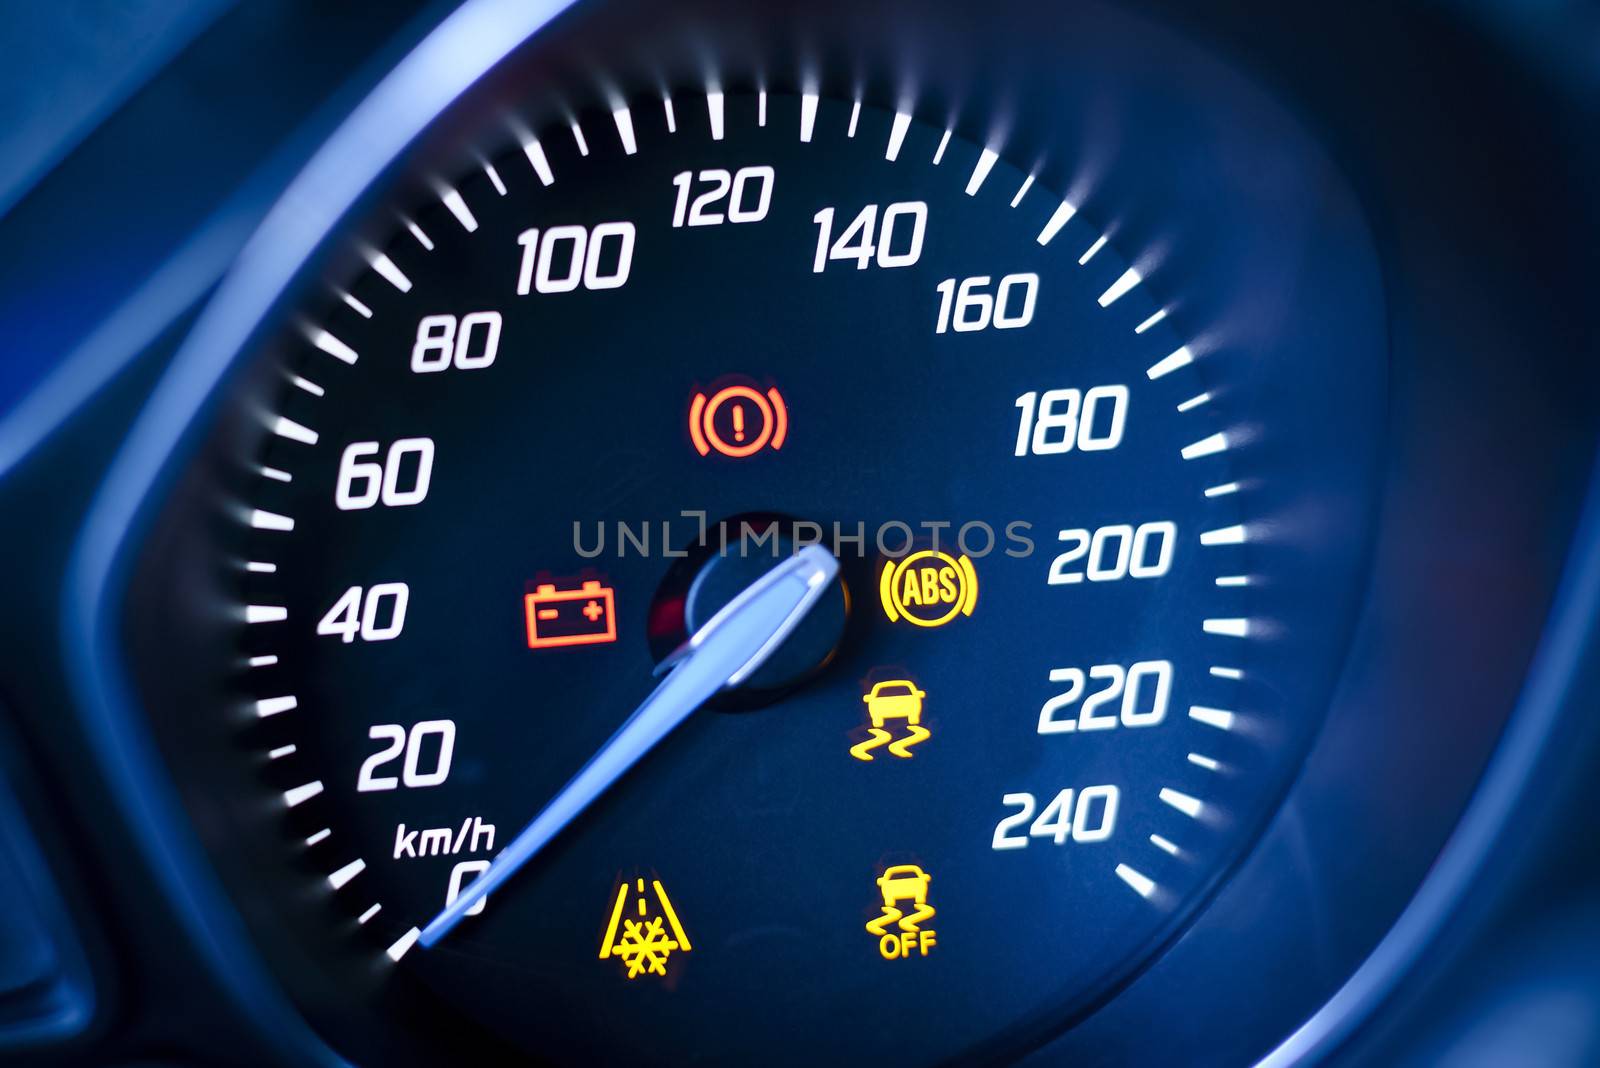 Fragment of instrument panel of car speedometer, tachometer with visible symbols of instrument cluster, with warning lamps illuminated. by westernstudio